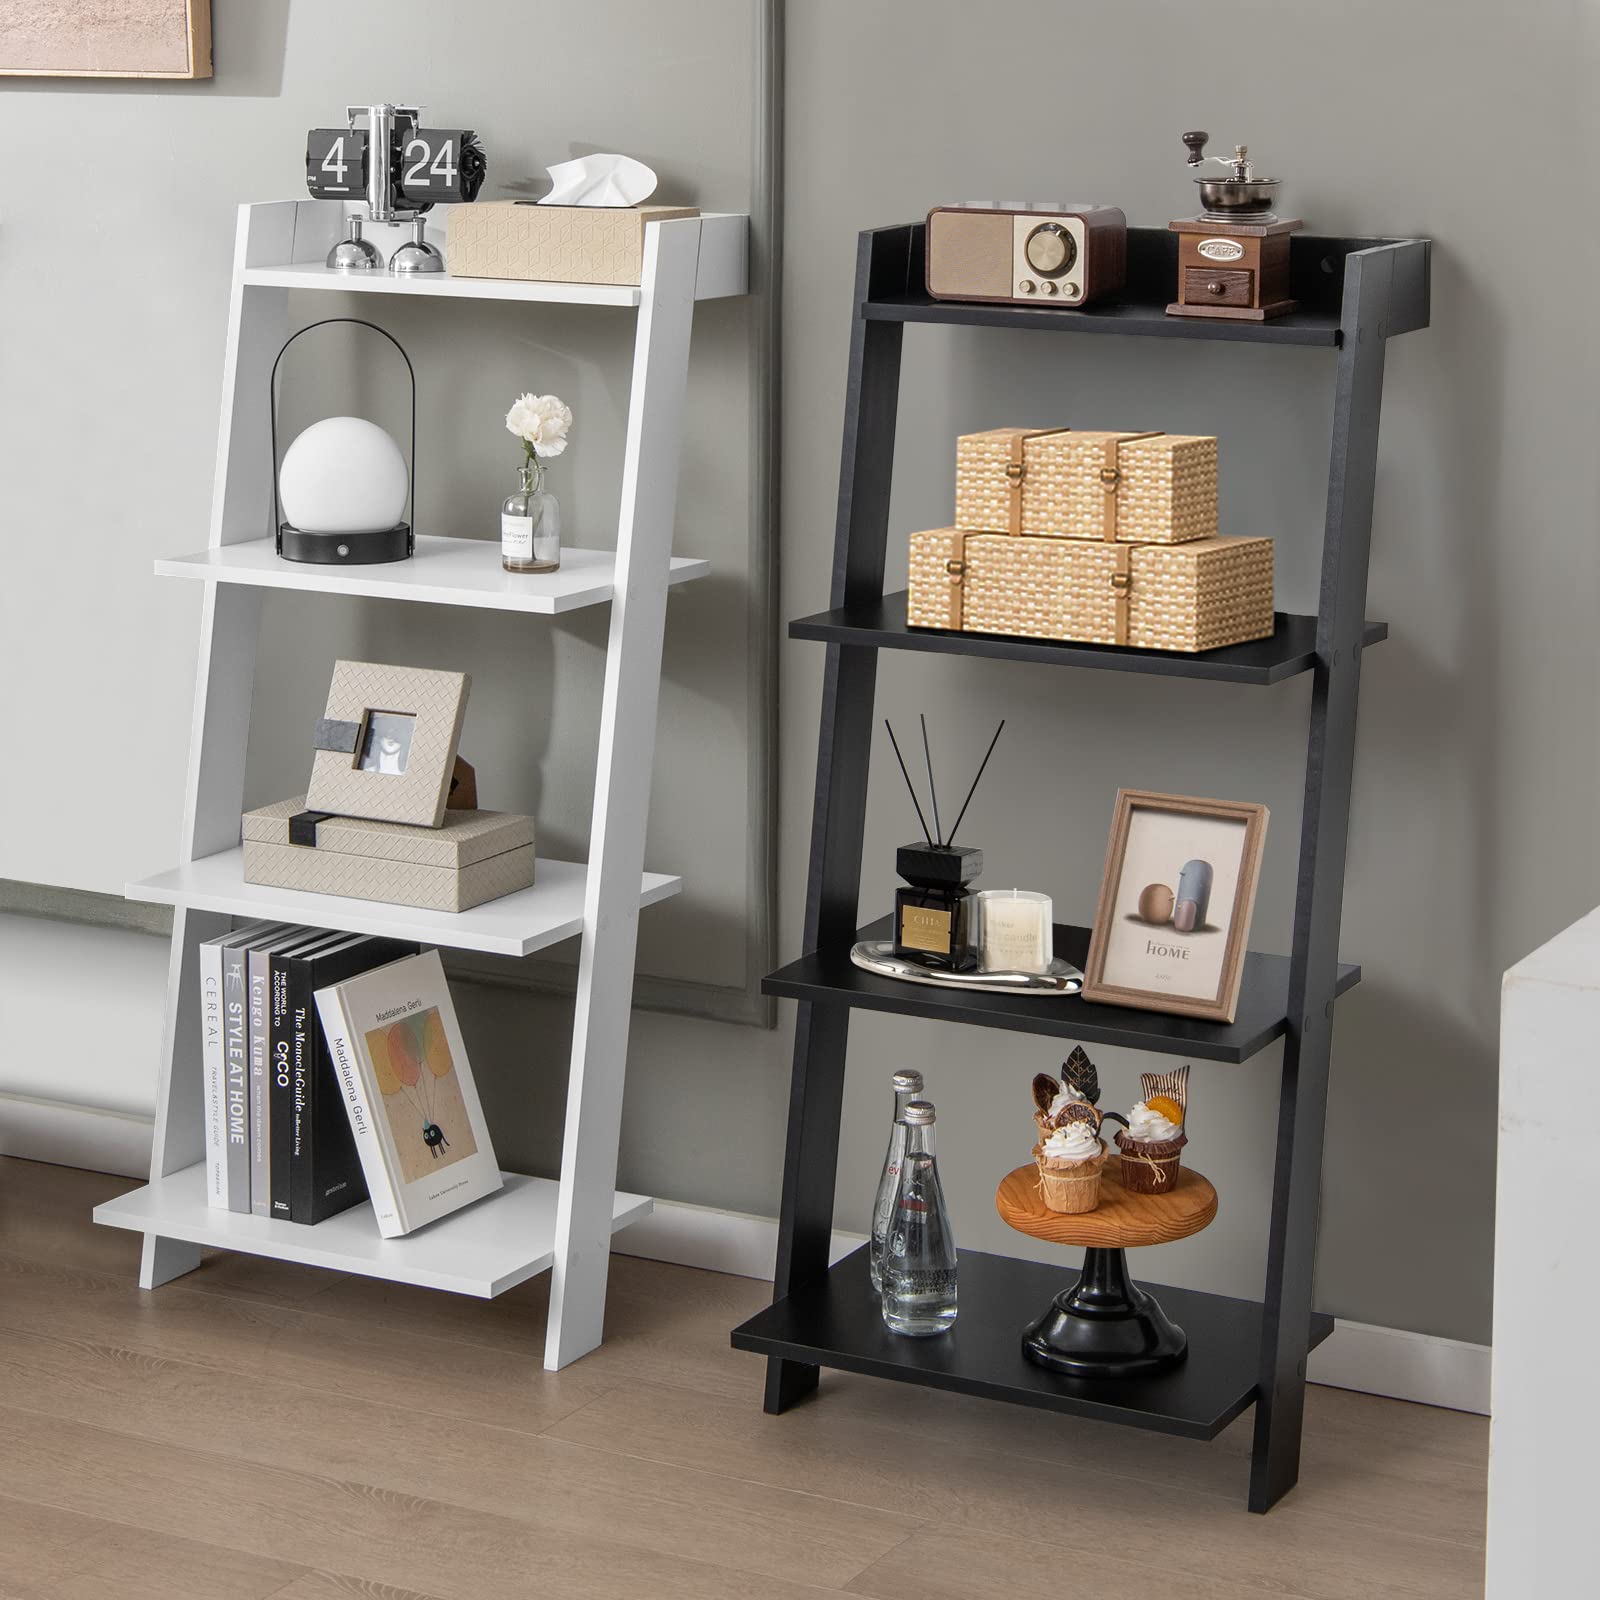 Giantex 4-Tier Wooden Ladder Shelf - Wall Leaning Storage Shelves with Anti-toppling Device